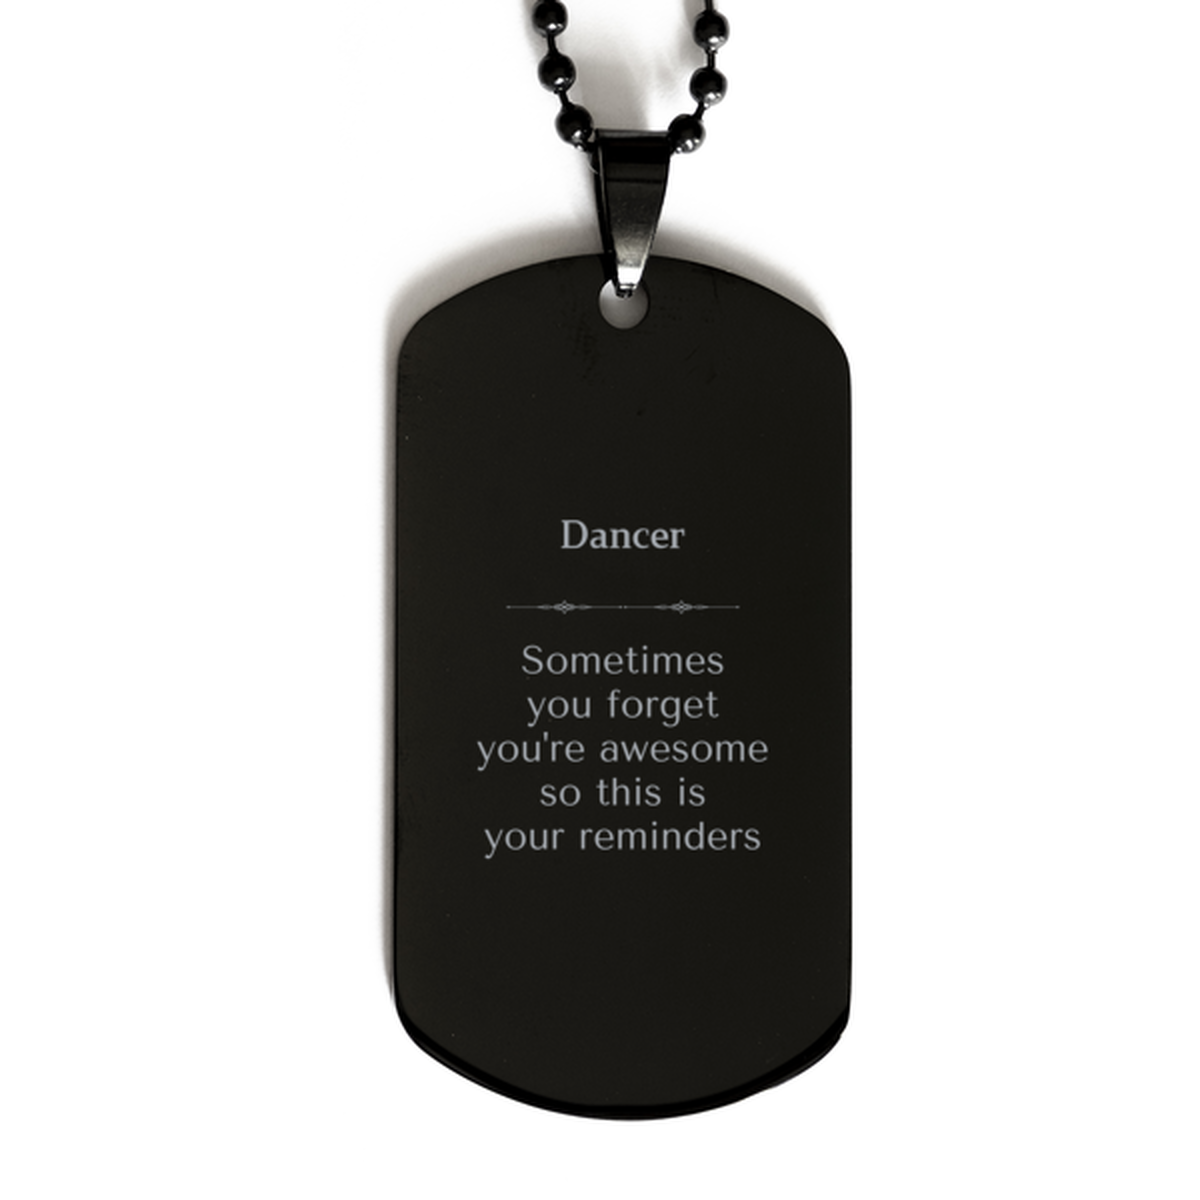 Sentimental Dancer Black Dog Tag, Dancer Sometimes you forget you're awesome so this is your reminders, Graduation Christmas Birthday Gifts for Dancer, Men, Women, Coworkers